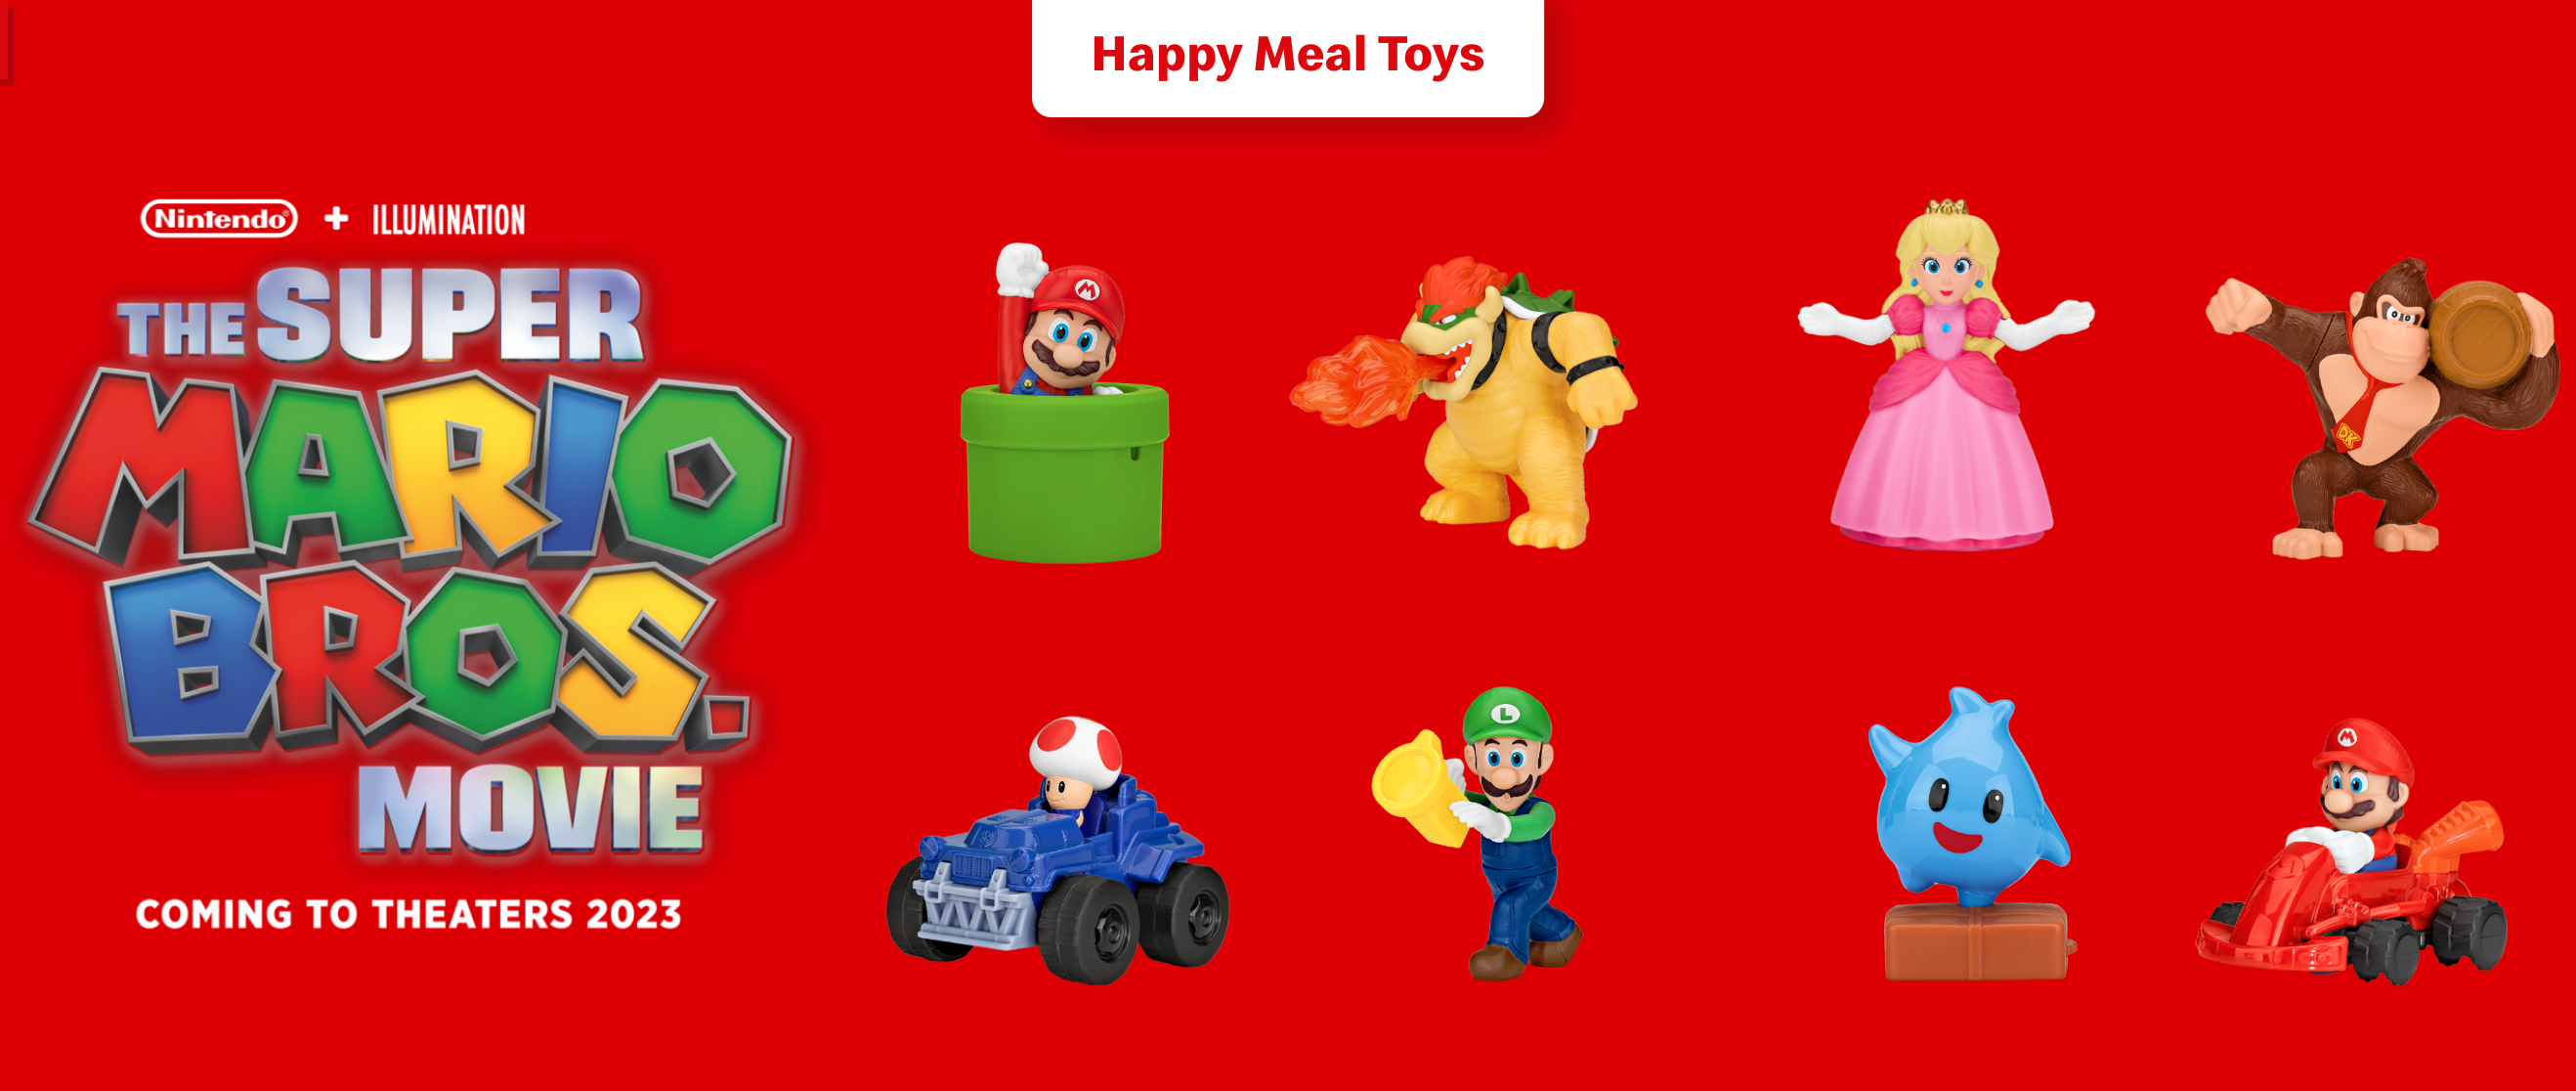 NEW Happy Meal Toys Released at McDonald’s! Disney by Mark